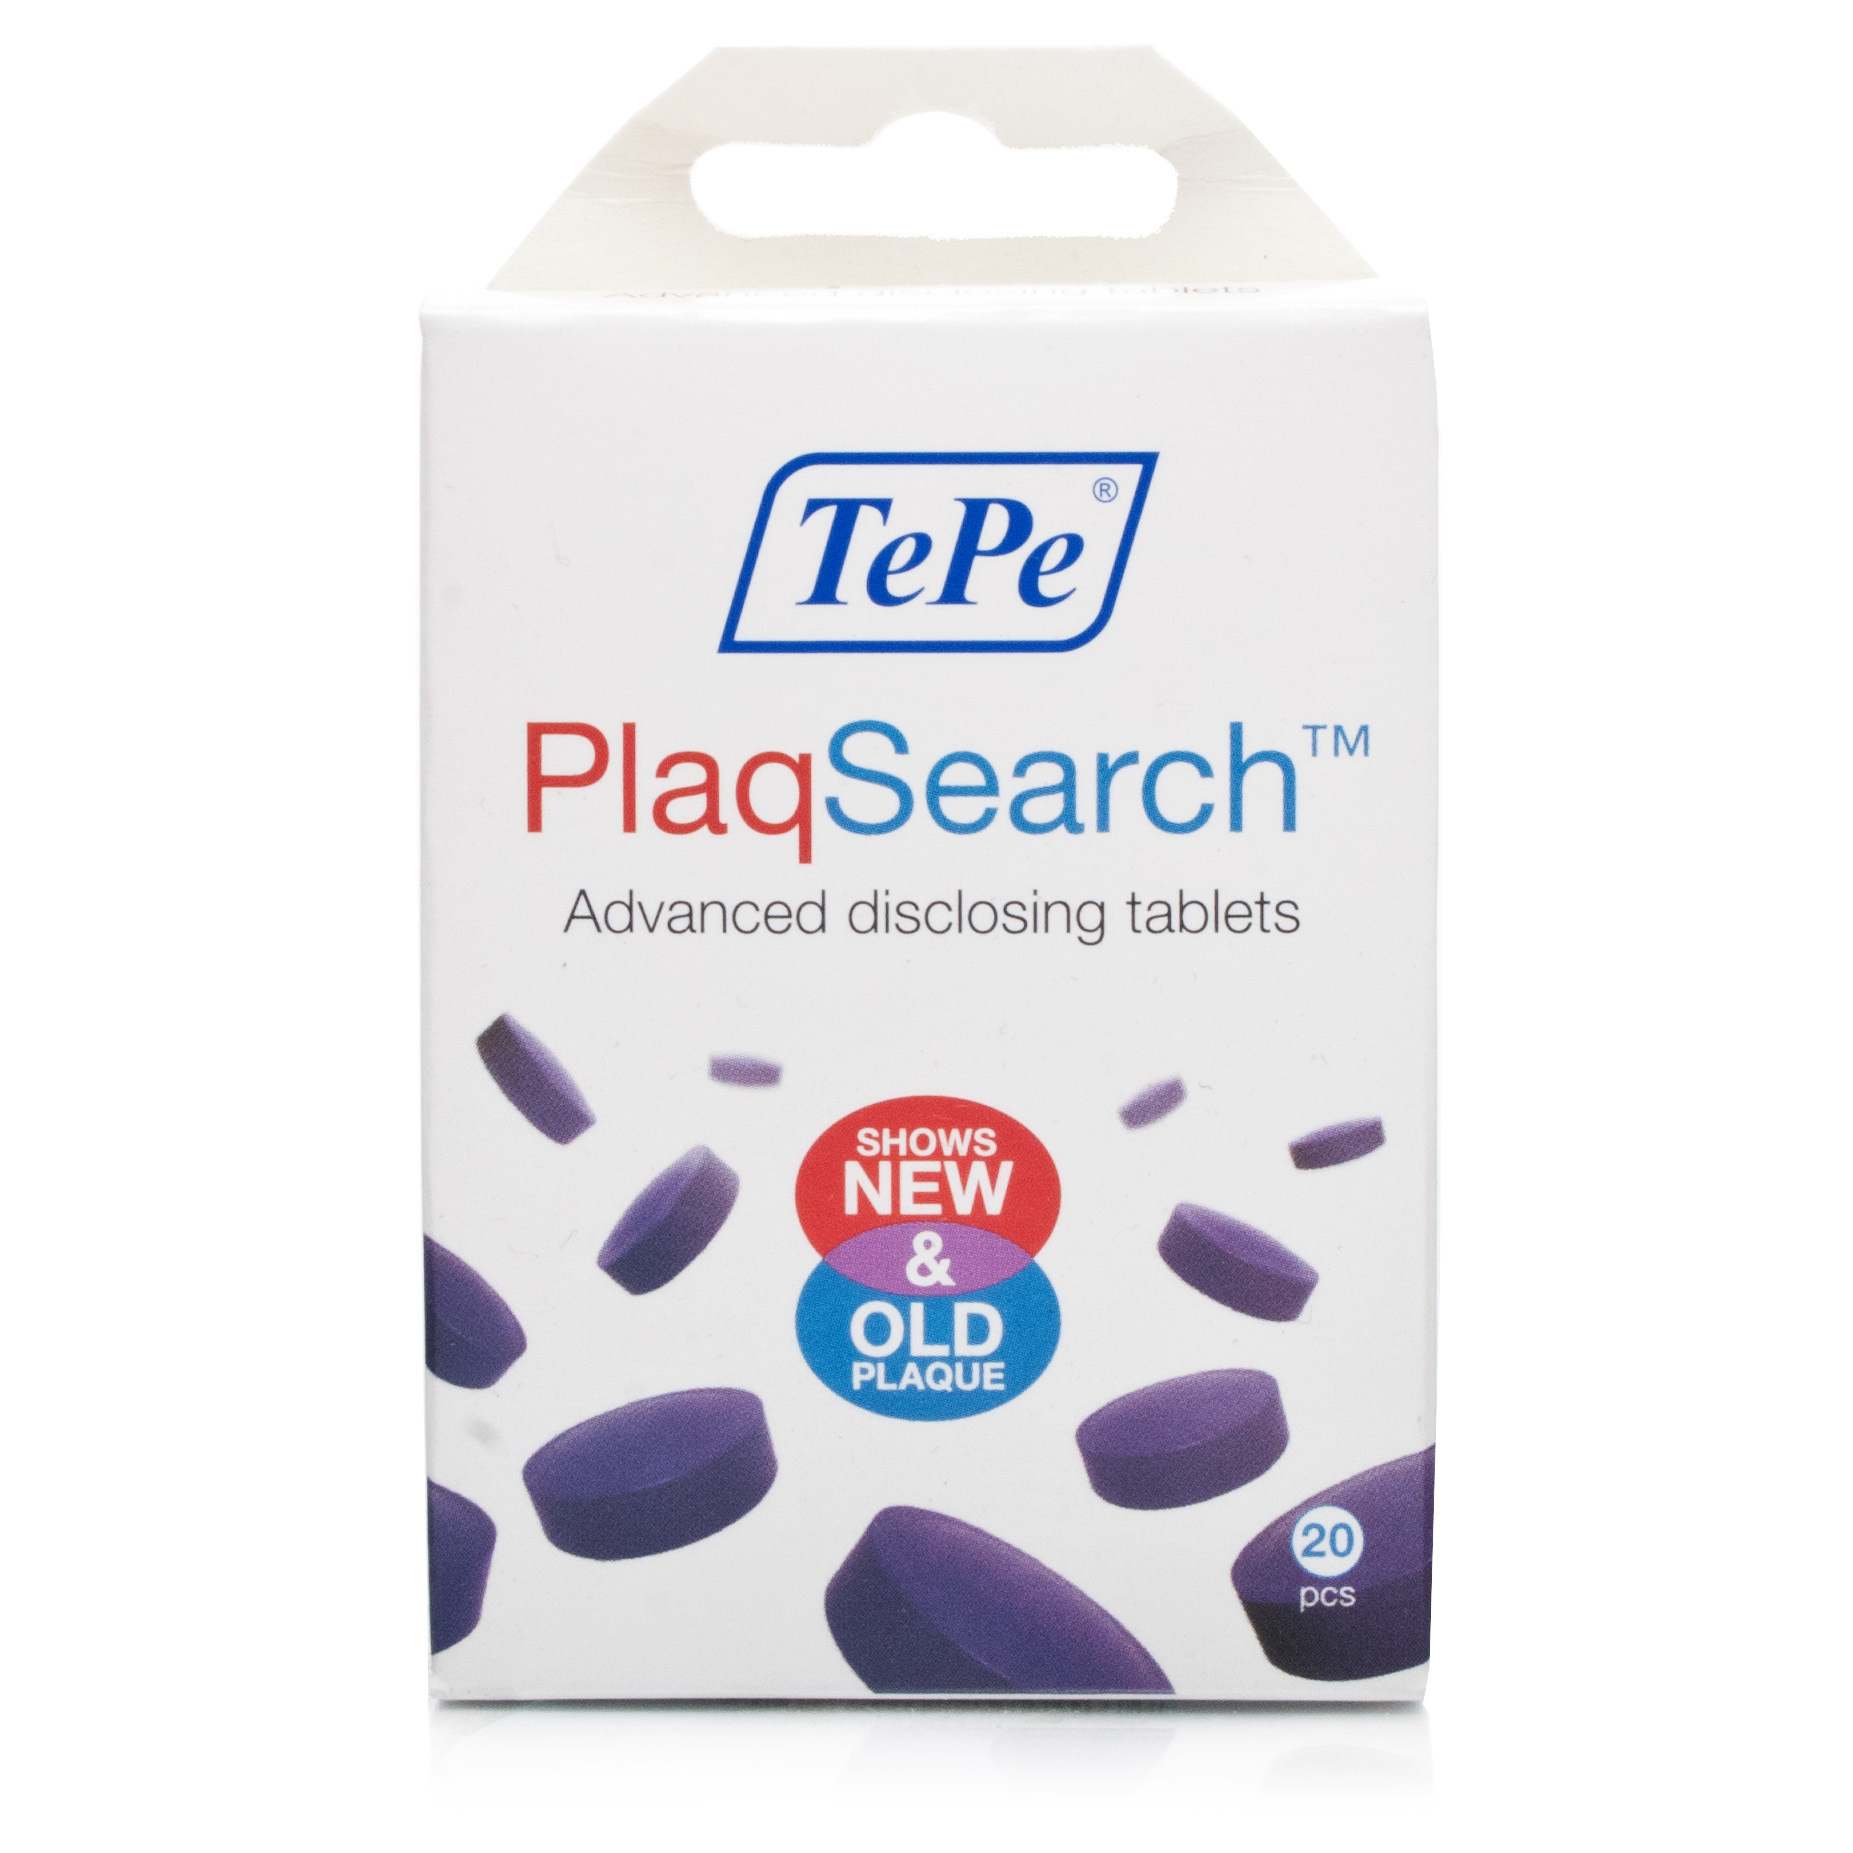 Plaqsearch Plaque Disclosing 20 Tablets | Chemist Direct1853 x 1853